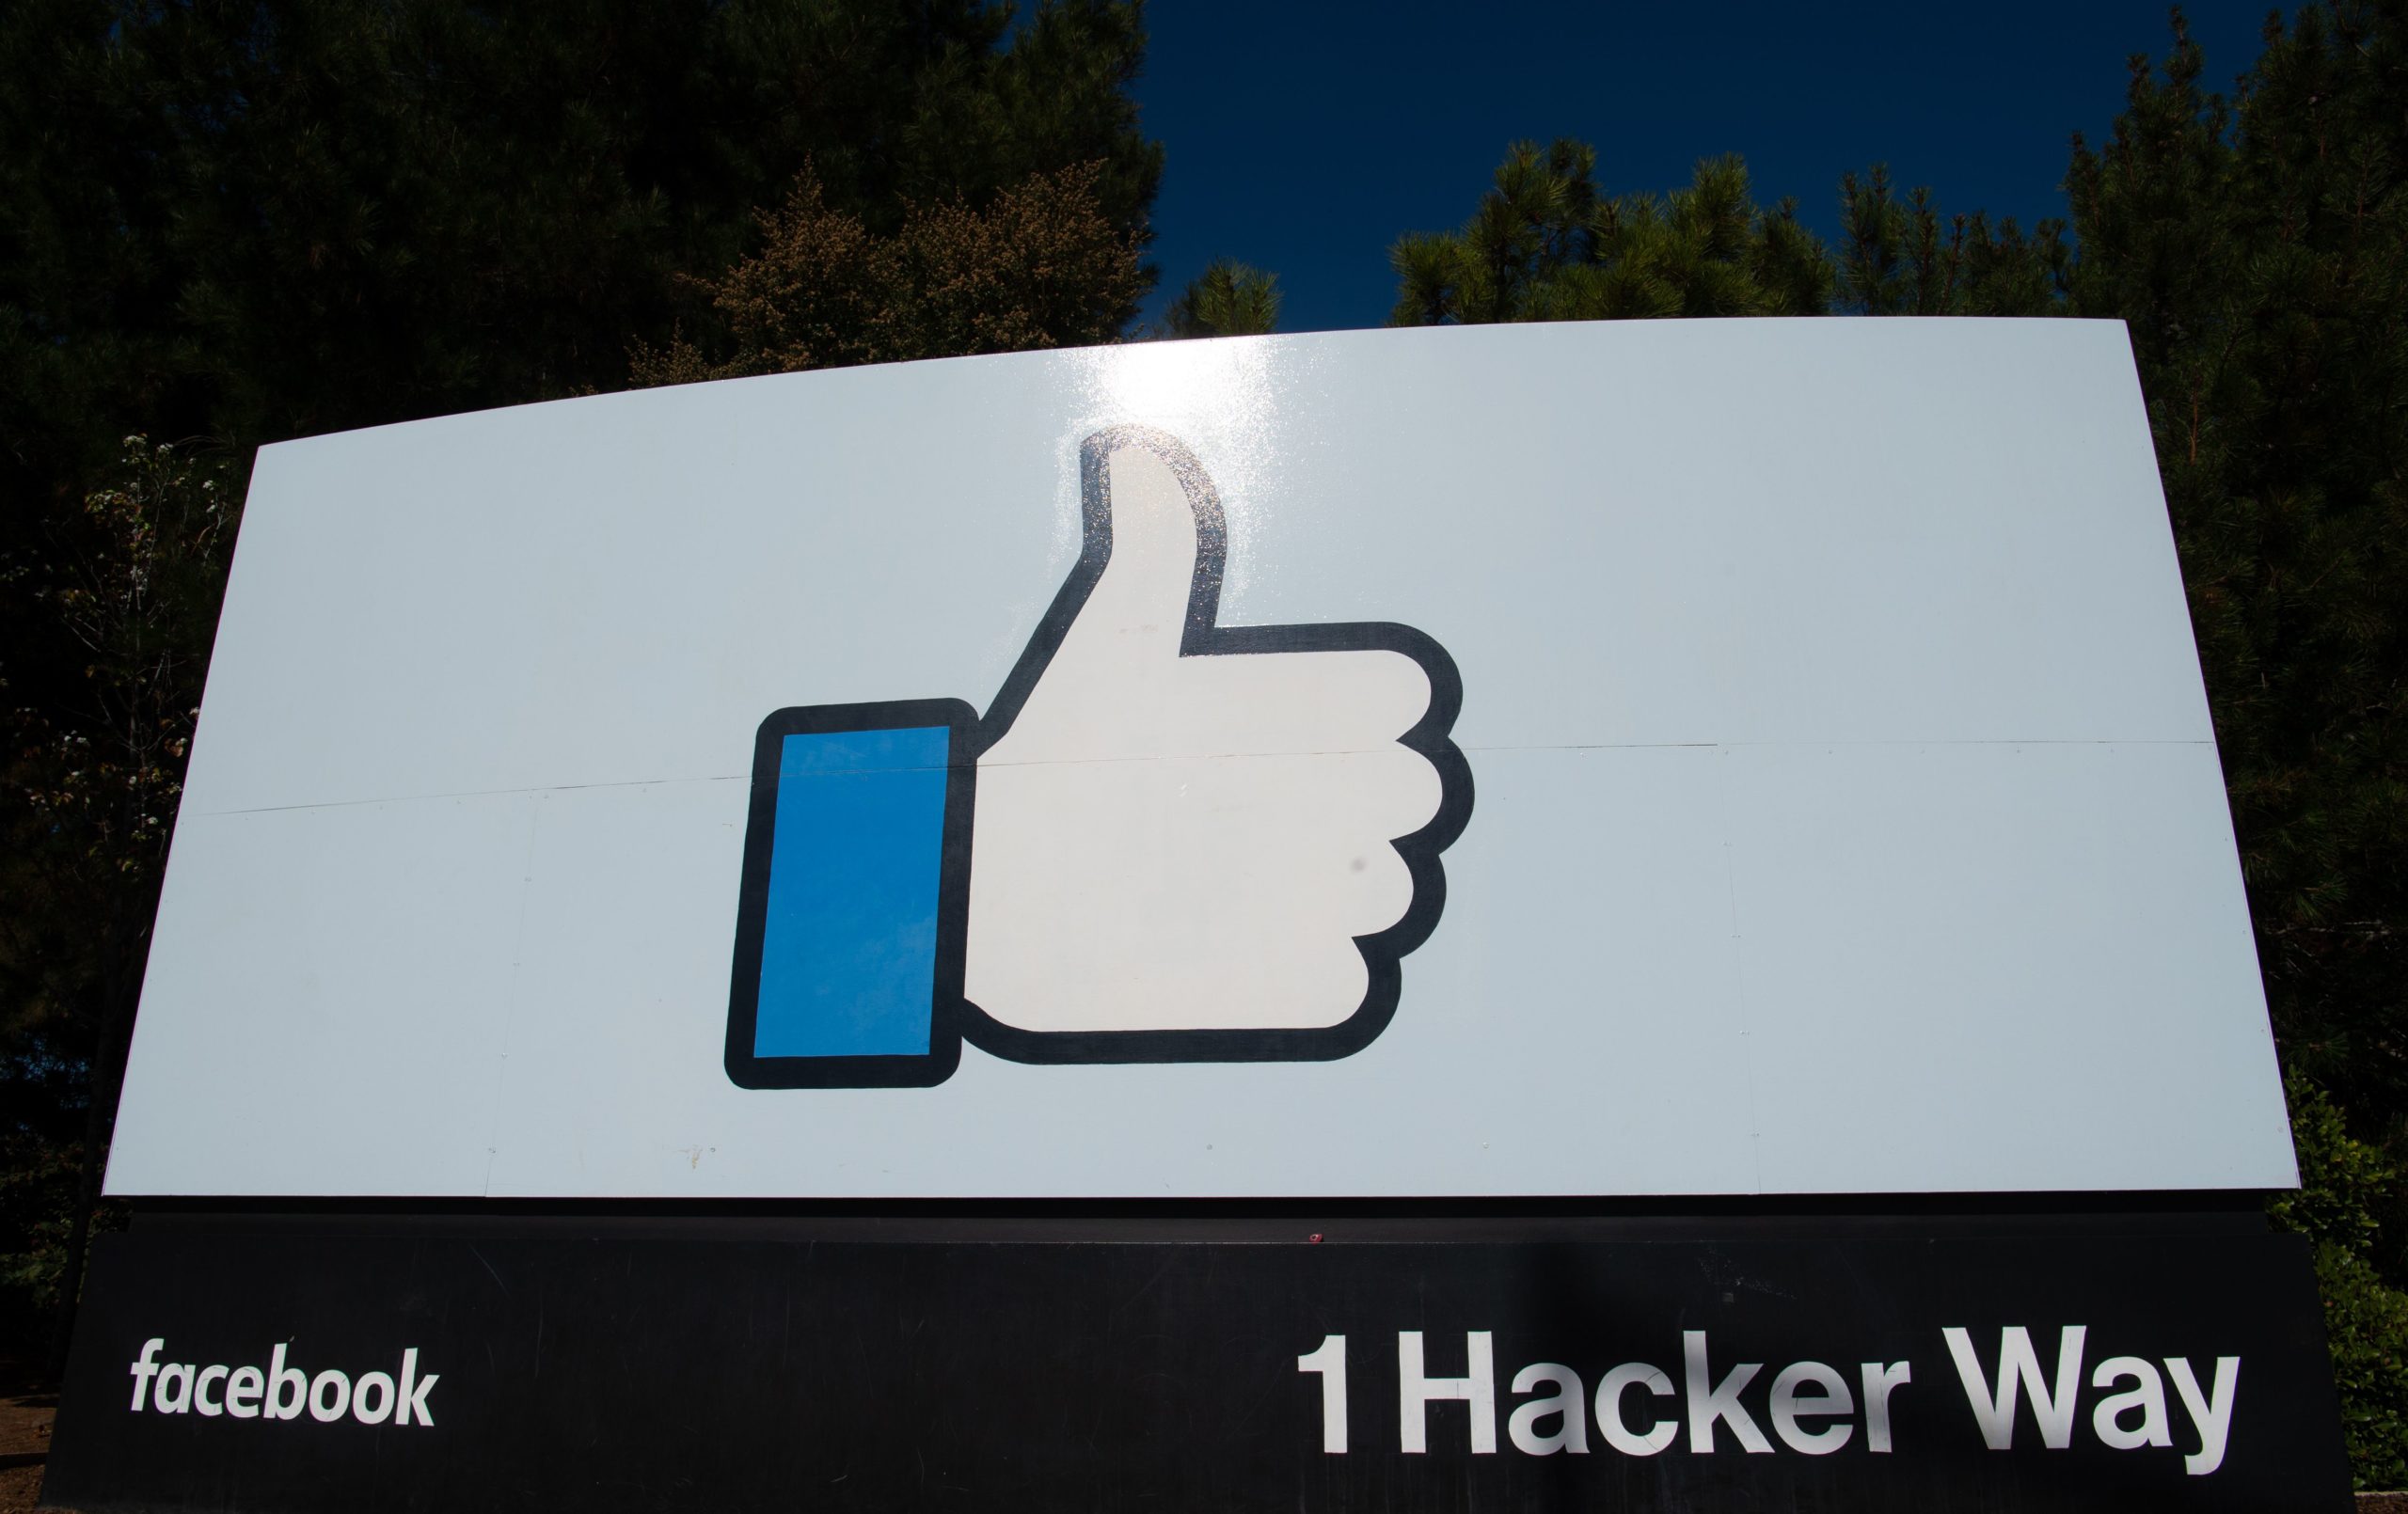 The Facebook "like" sign is seen at Facebook's corporate headquarters campus in Menlo Park, California, on October 23, 2019. (Photo by JOSH EDELSON/AFP via Getty Images)